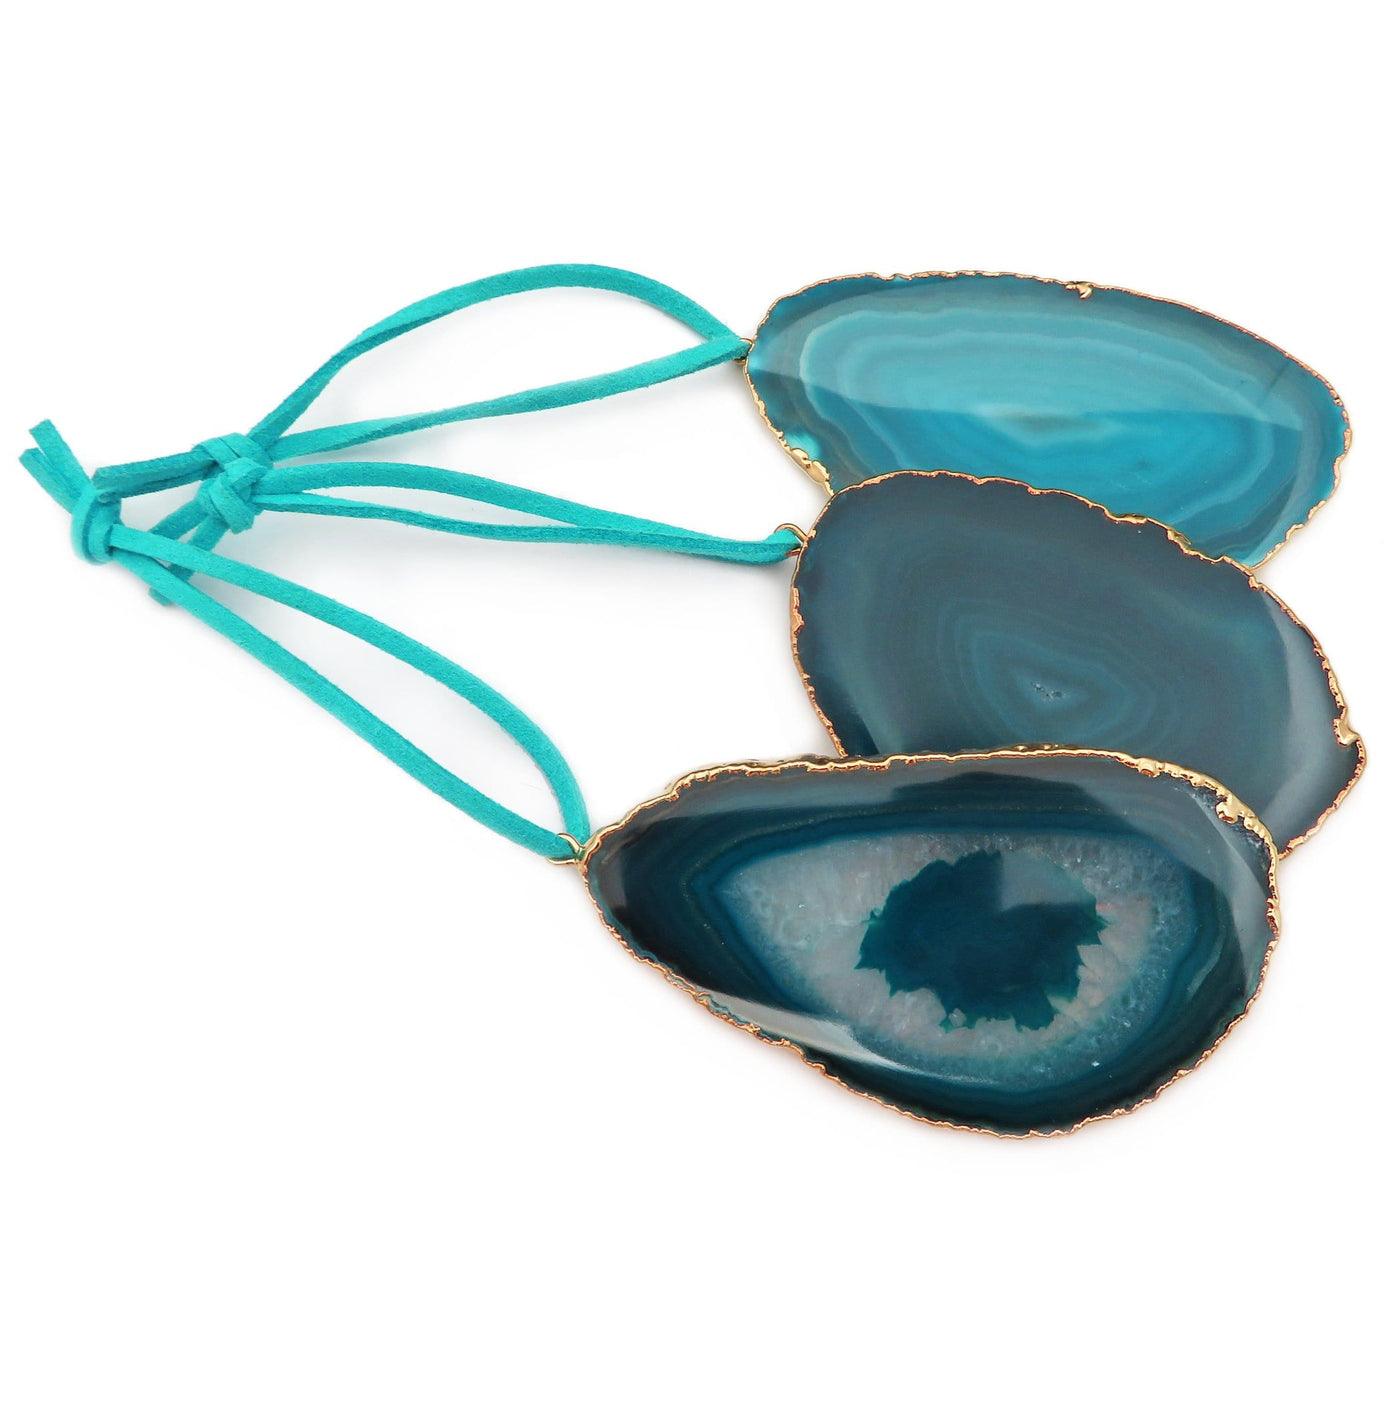 Freeform Gold Trim Agate Christmas Ornaments - teal ones